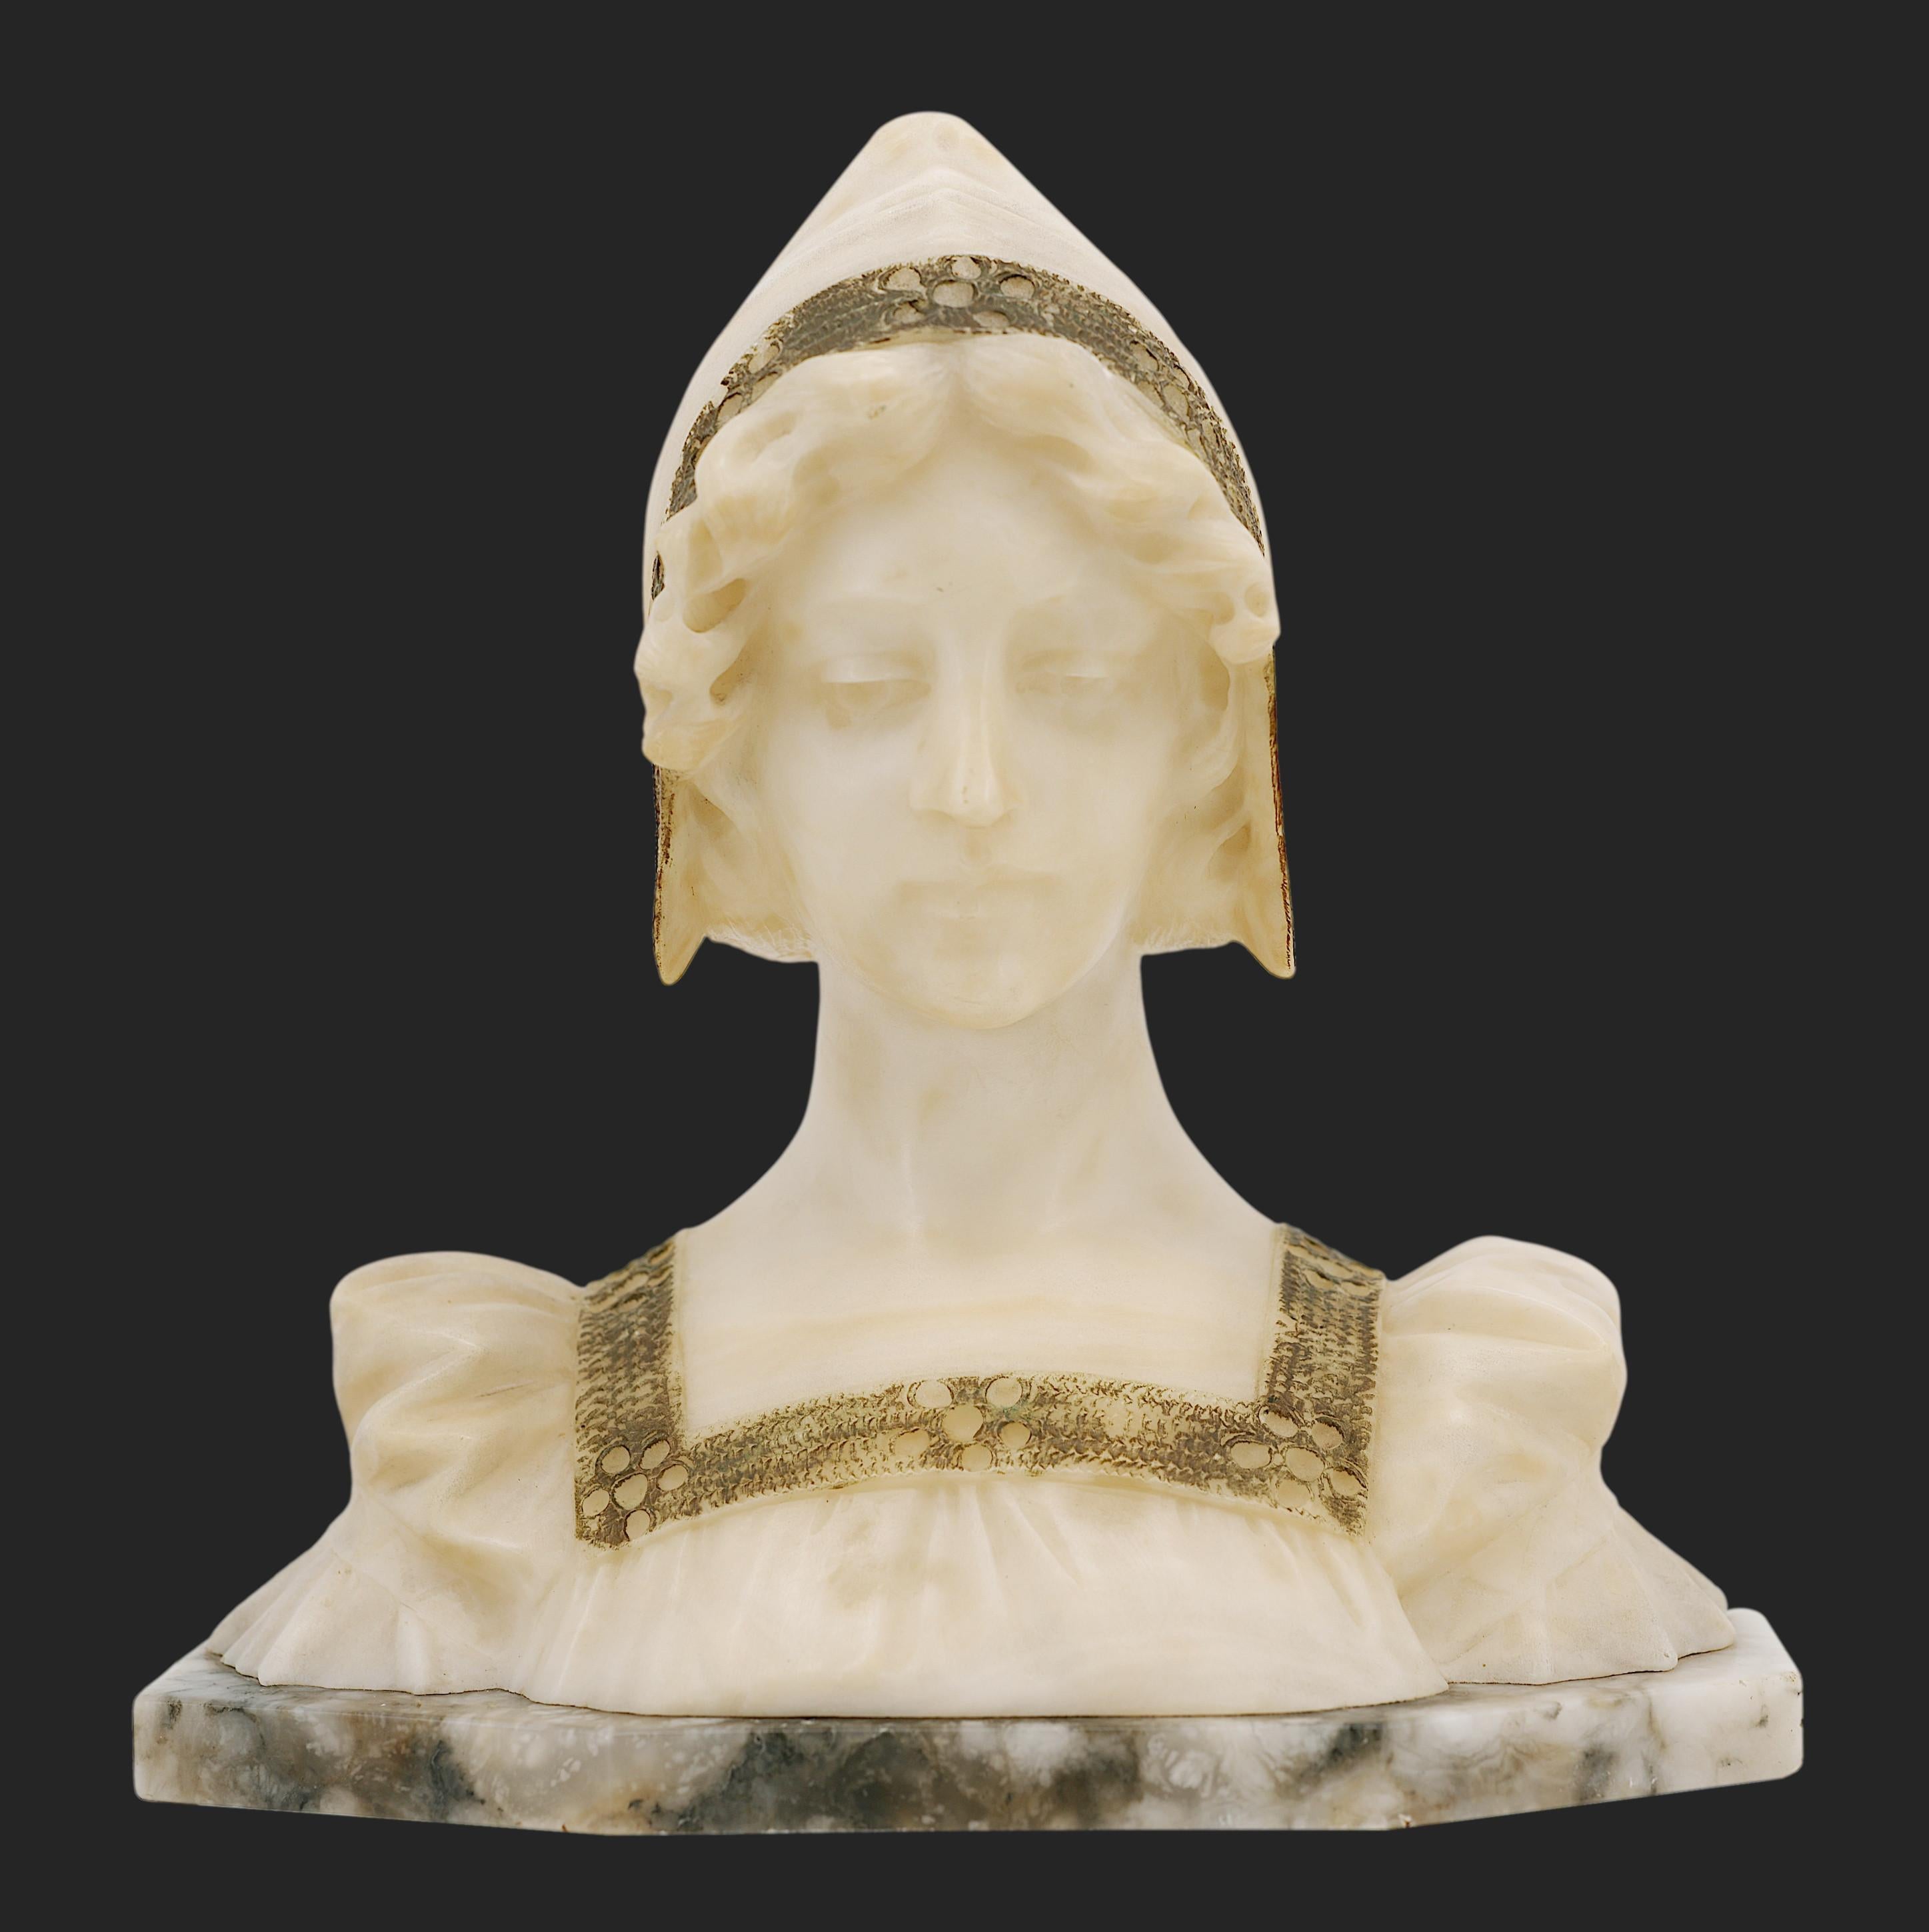 French Art Nouveau sculpture, France,  ca.1900. Young Lady Bust. Alabaster & marble. In direct carving. Height : 12.2